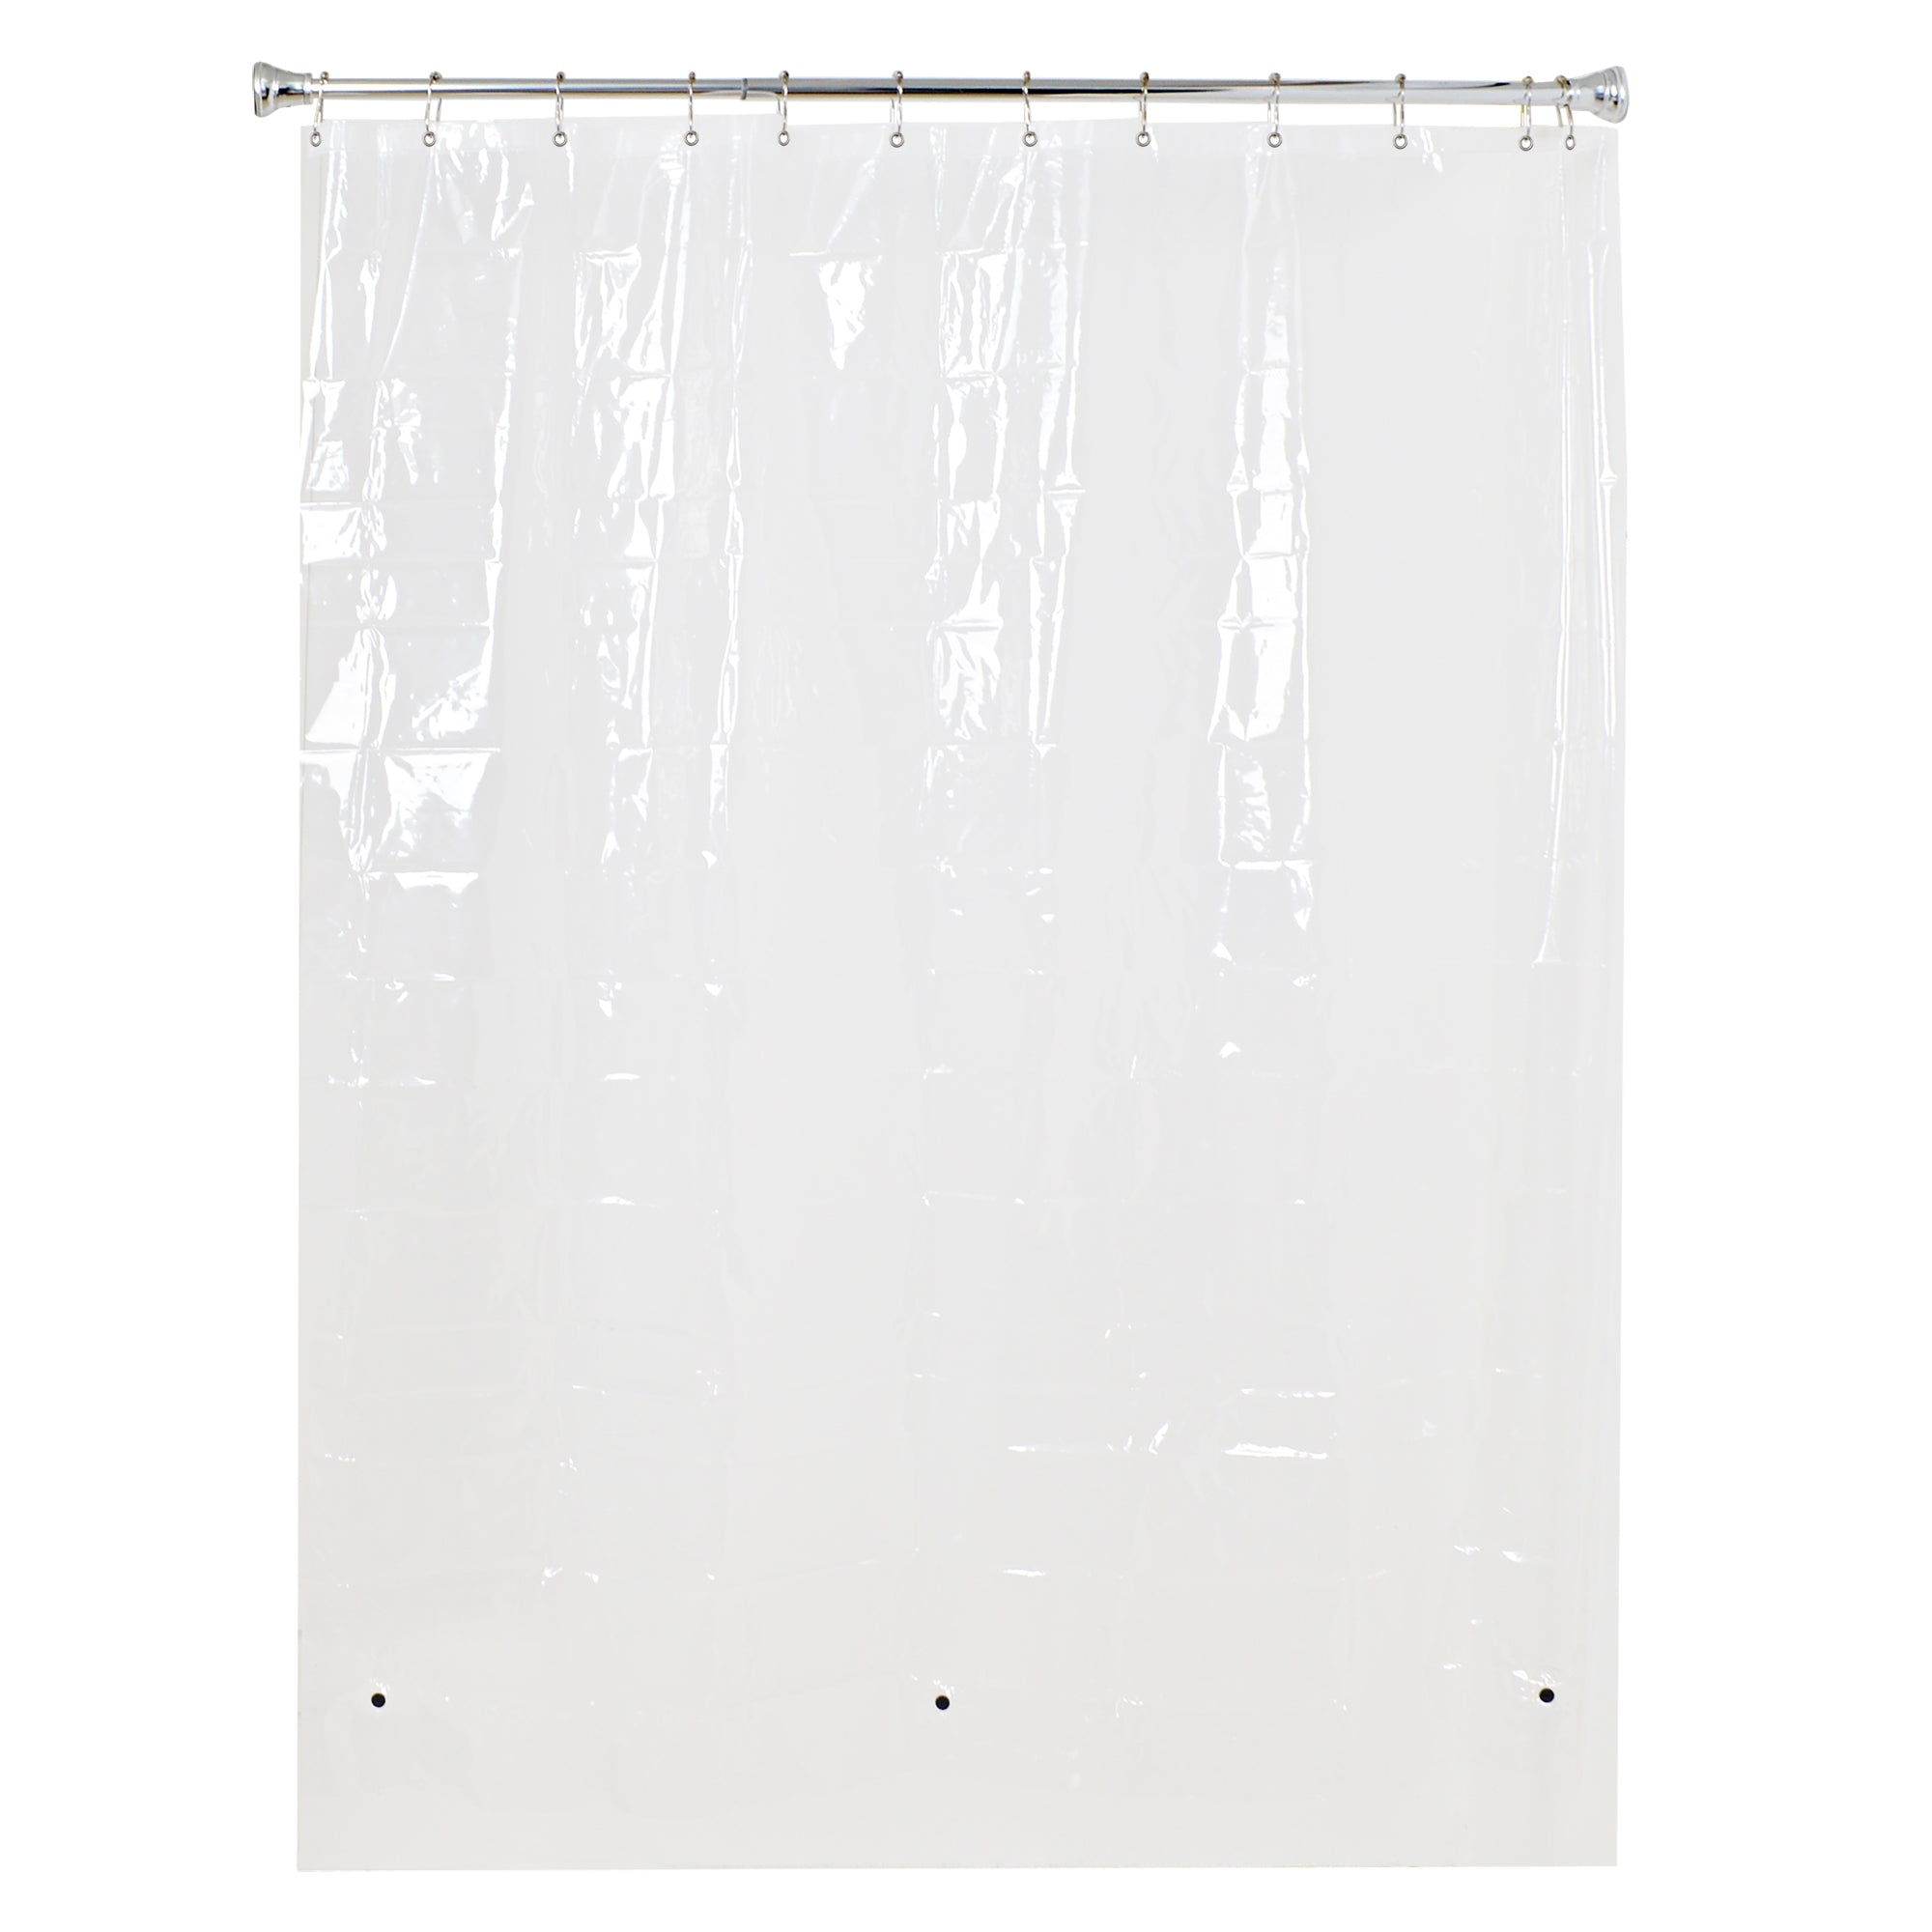 Utopia Alley BL5KK 72"X72" 4.8G Clear PEVA Shower Curtain Liner with Magnets